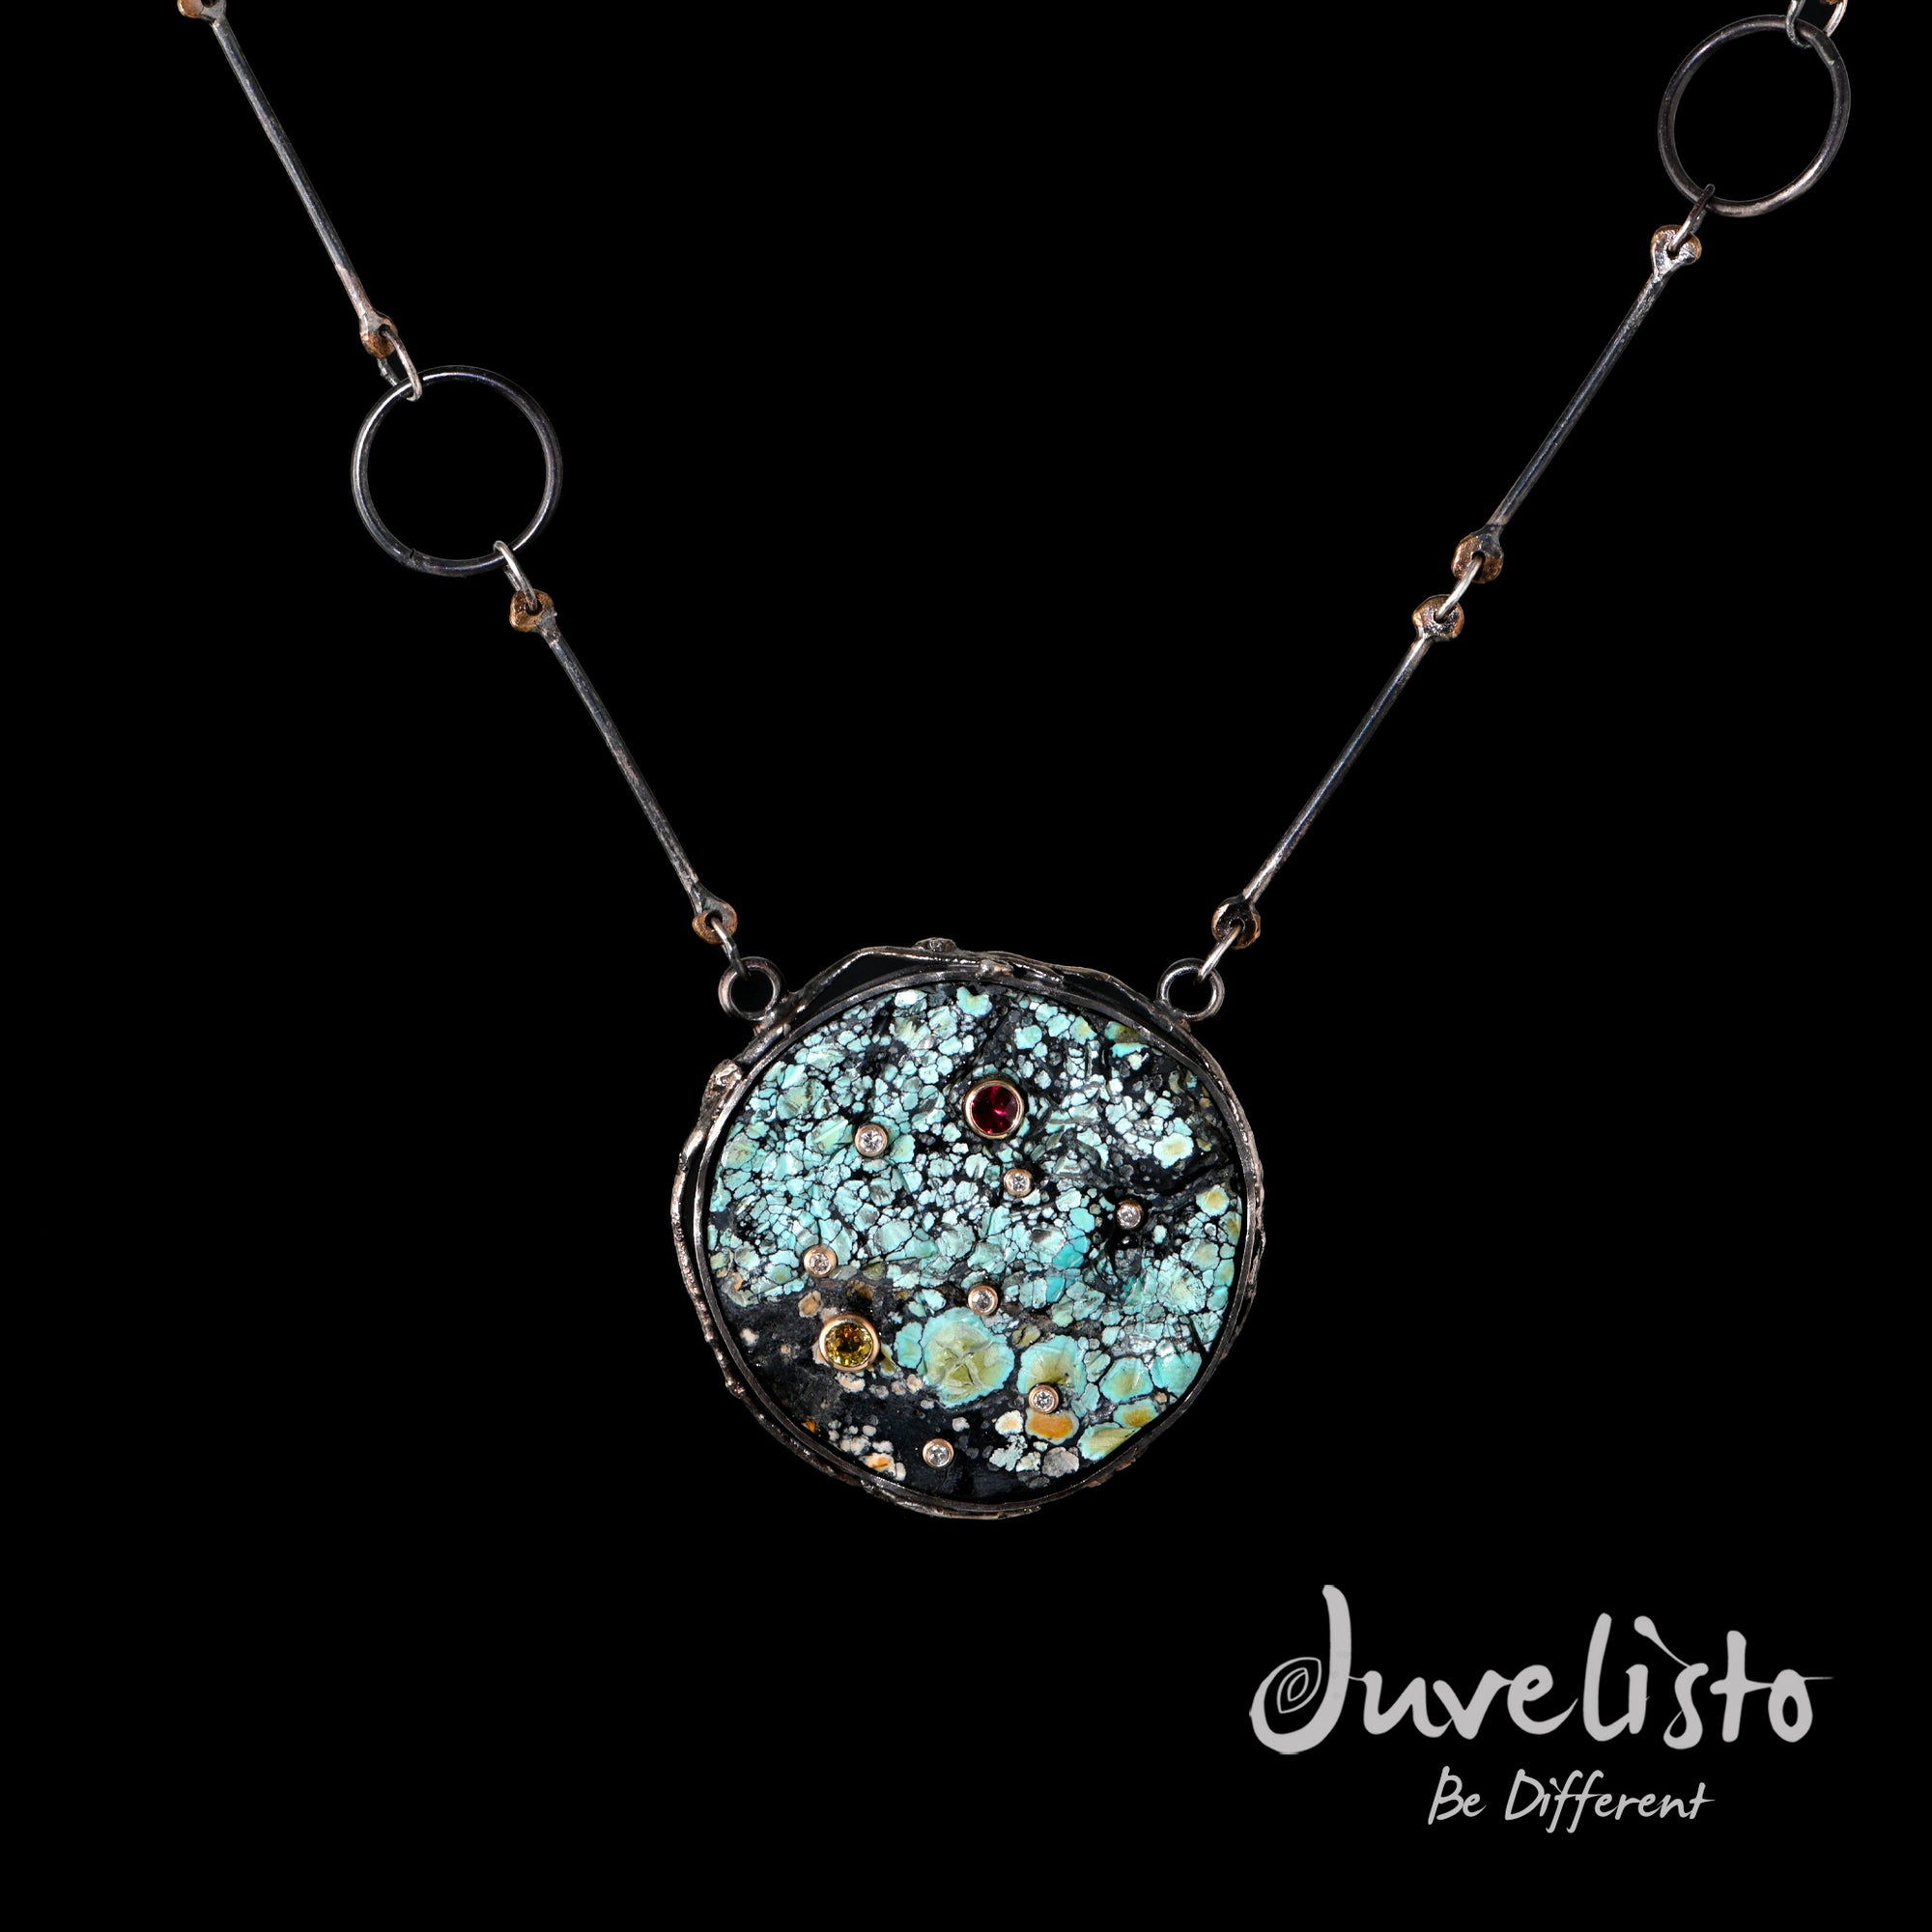 Juvelisto Design | Turquoise Pendant Necklace with Diamonds, Sapphire and Garnet